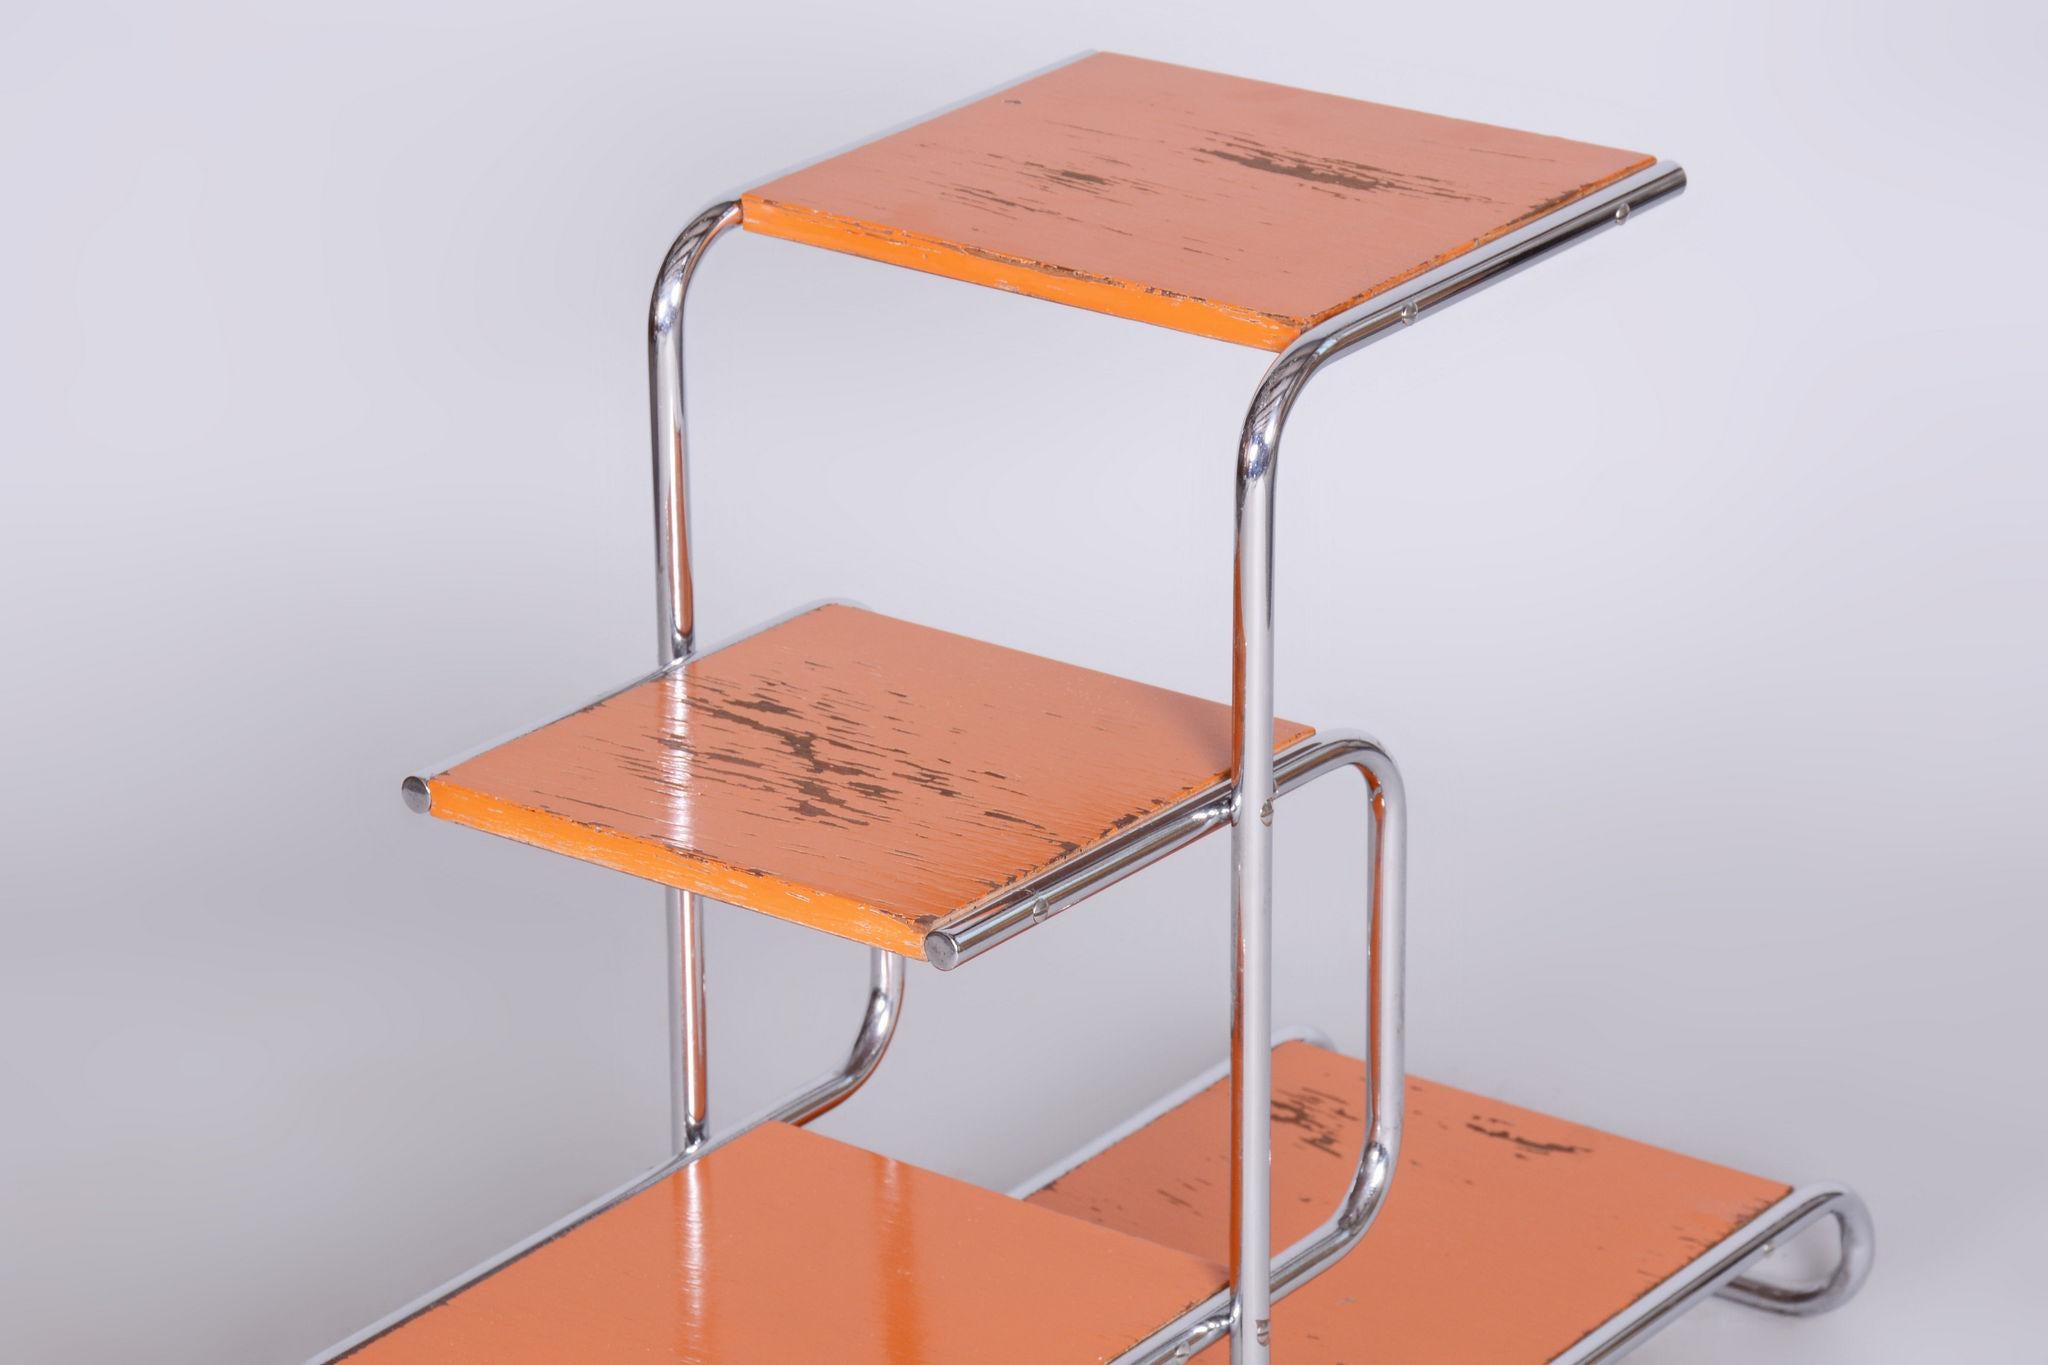 Restored Bauhaus Étagère, Chrome-Plated Steel, Lacquered Wood, Czechia, 1930s For Sale 2